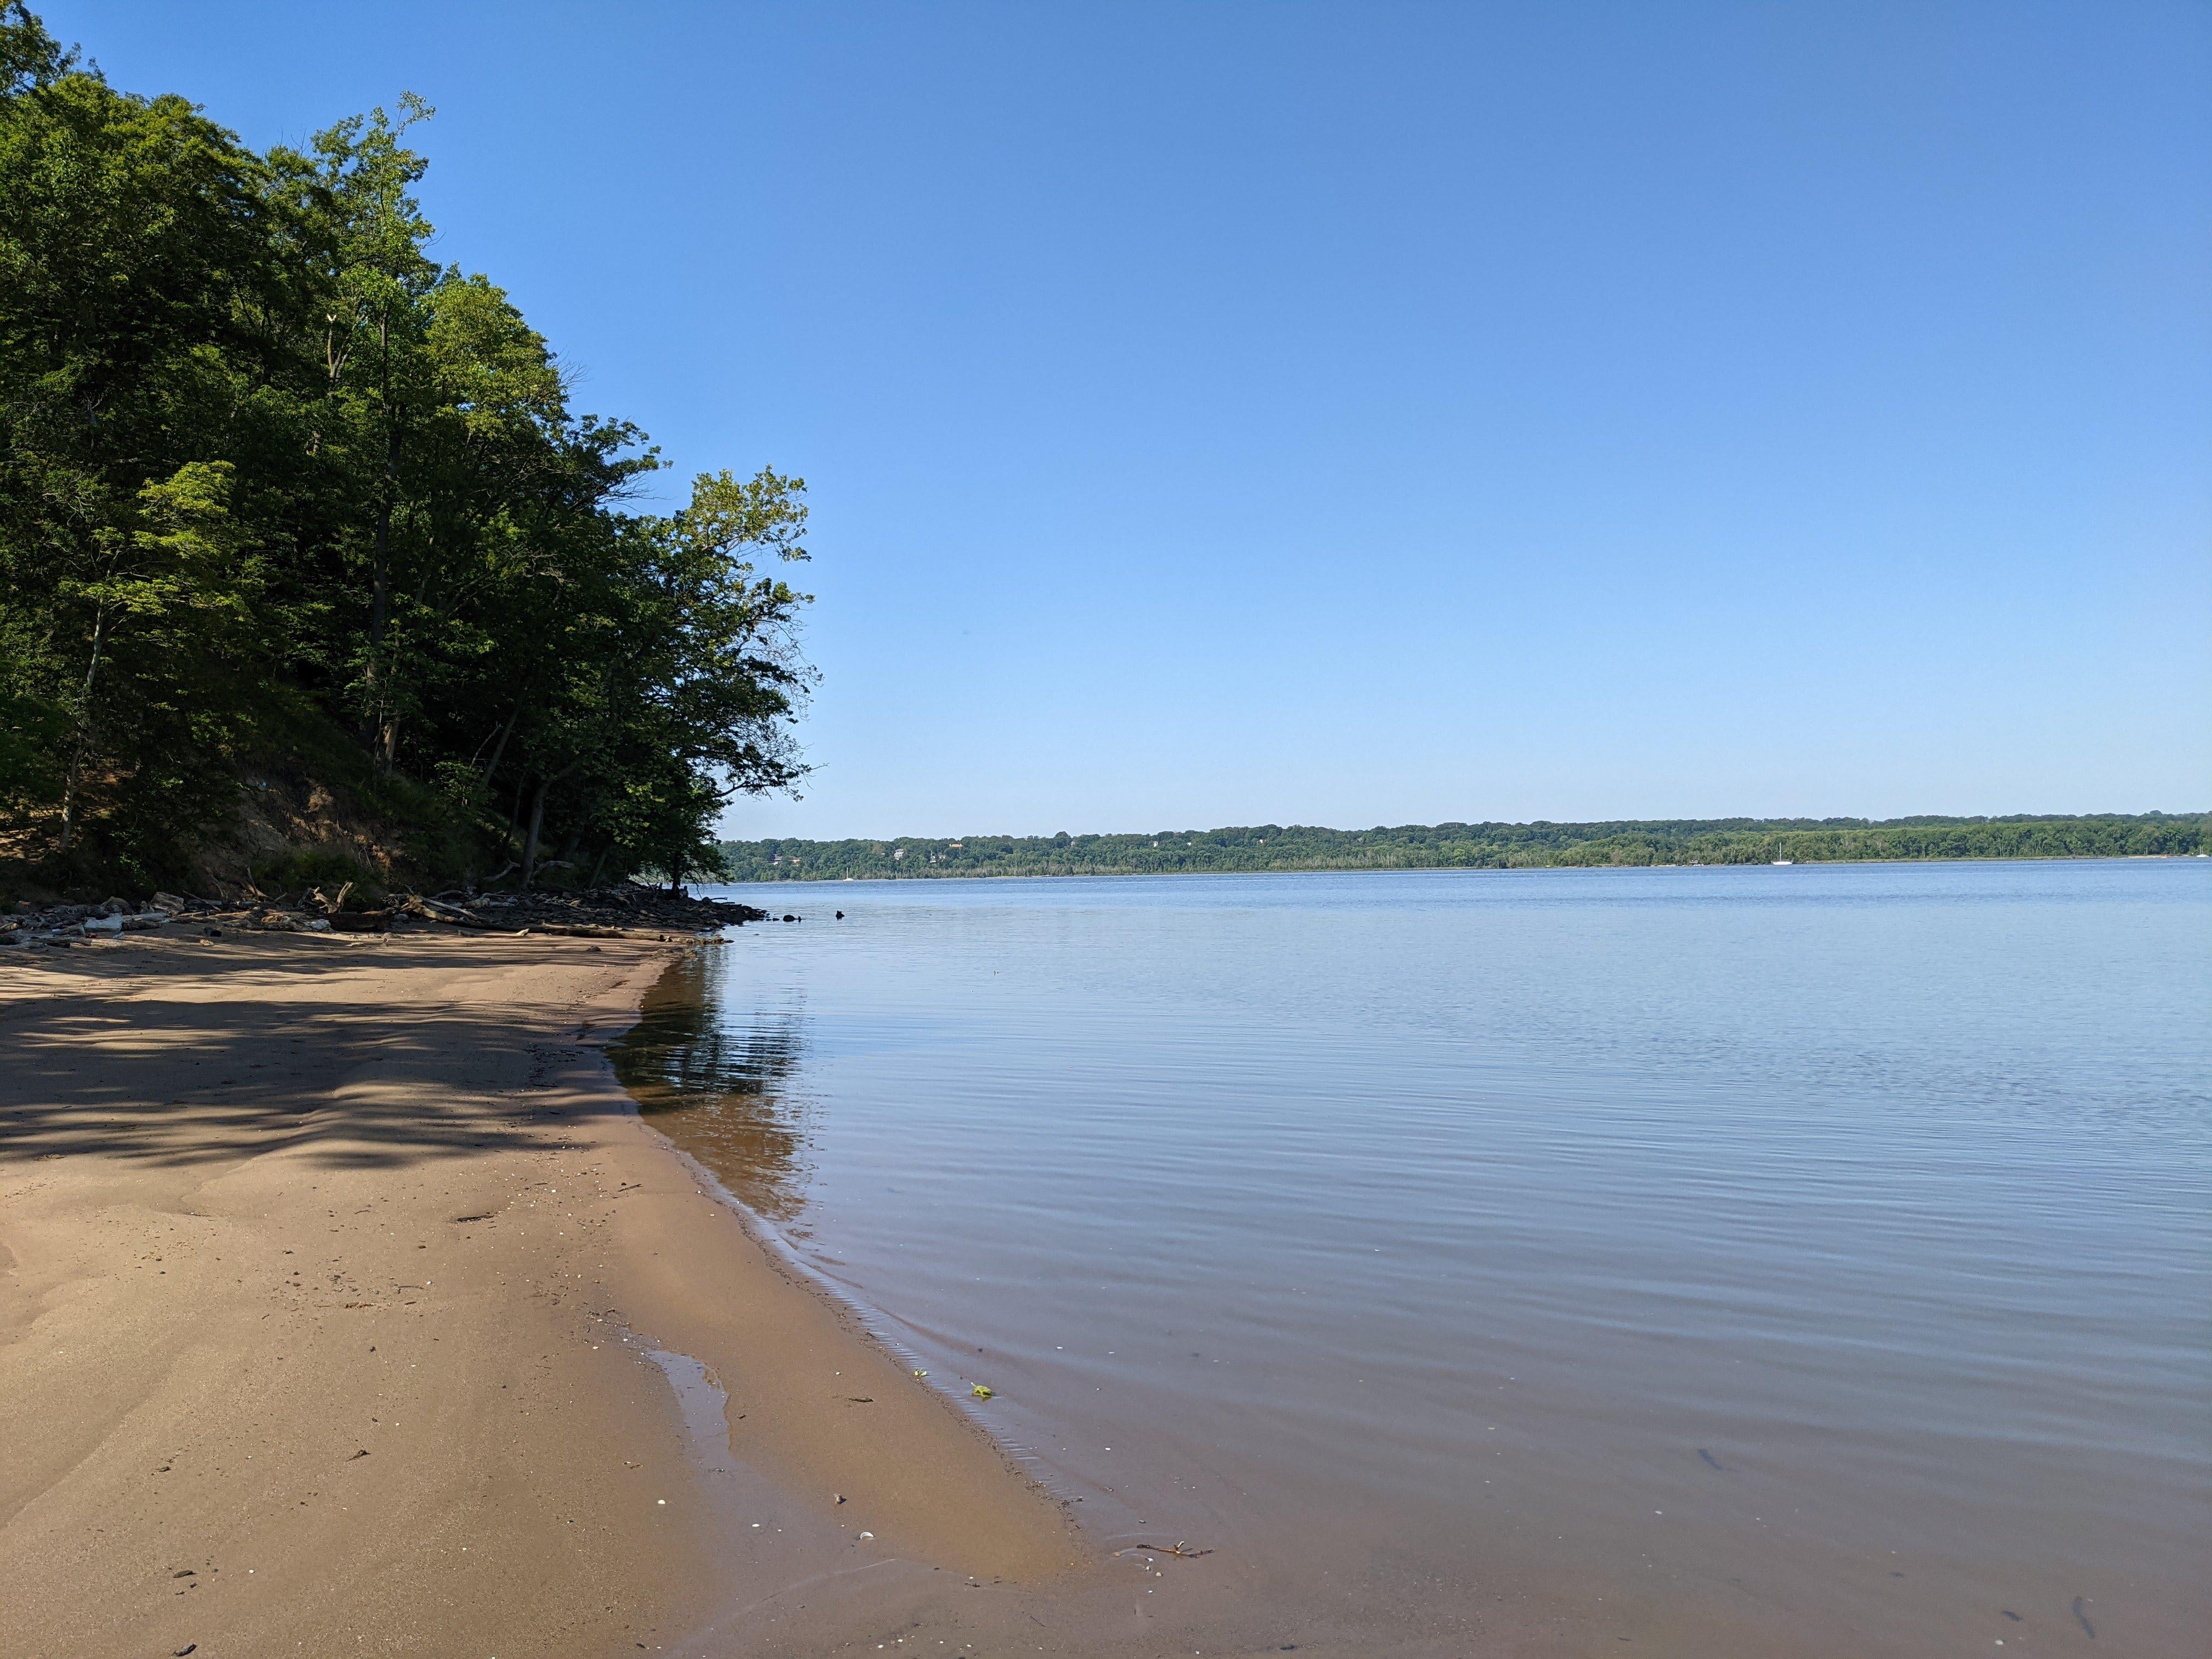 a small sandy beach with trees